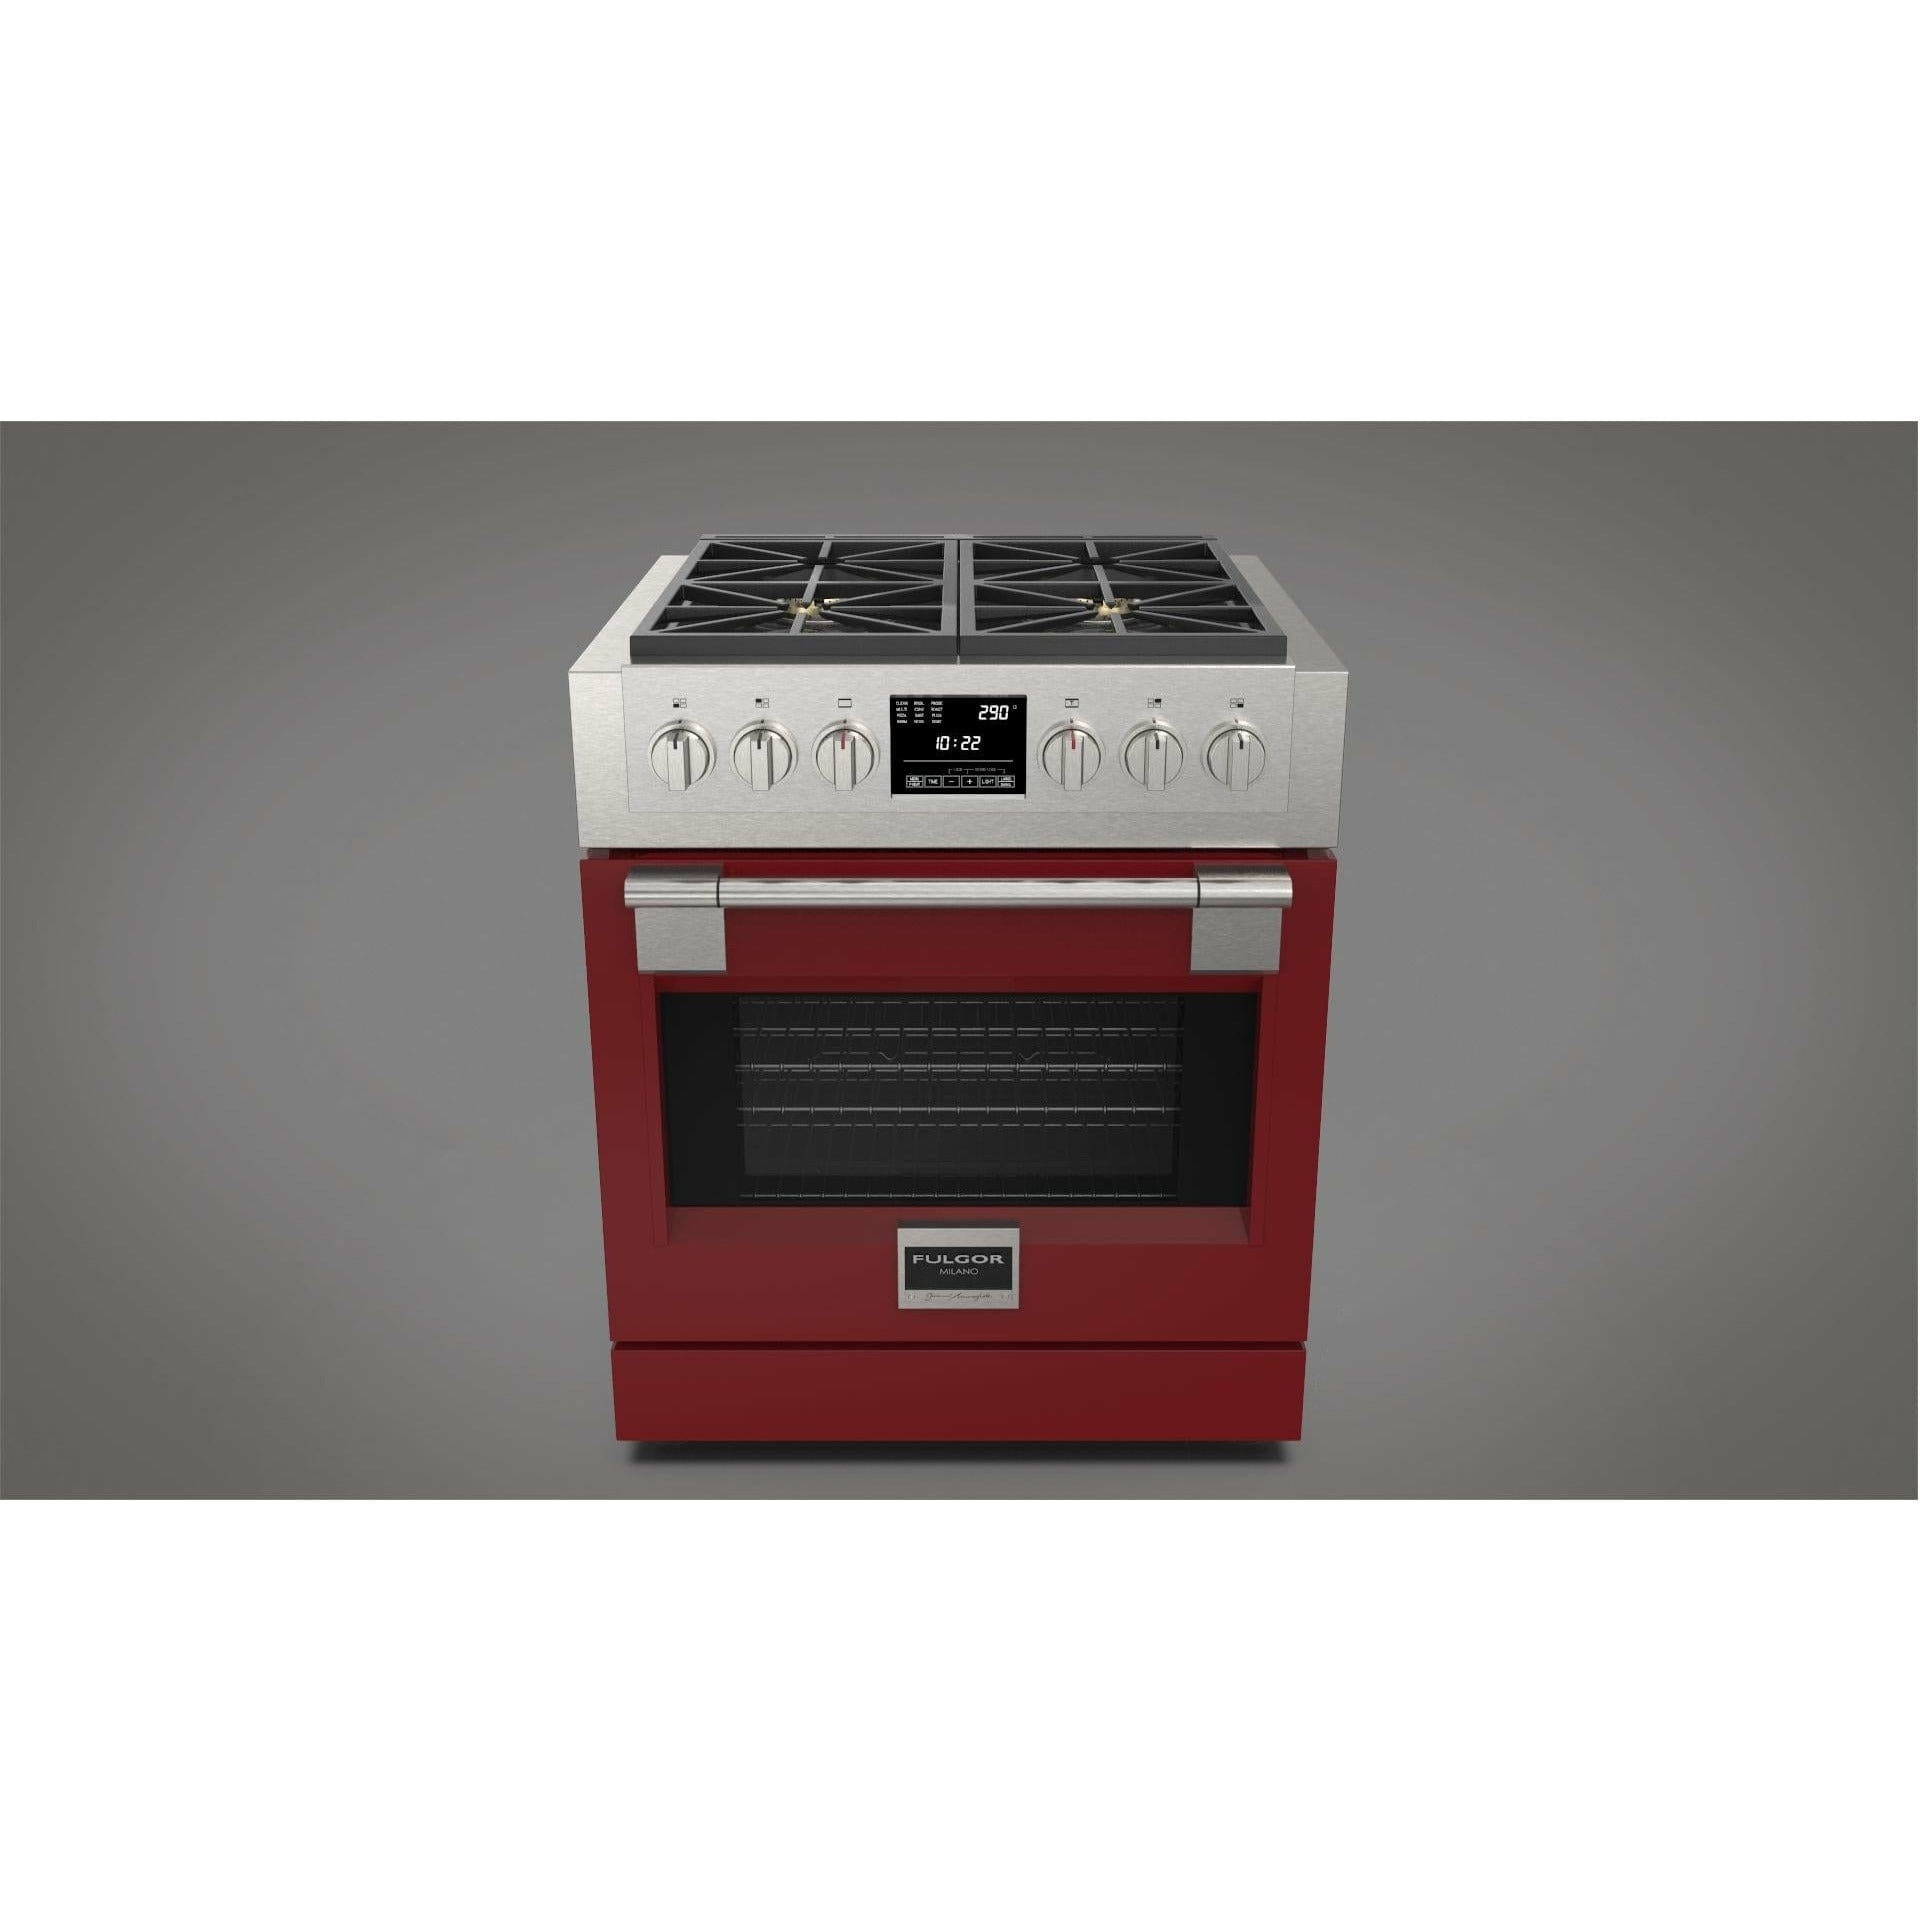 Fulgor Milano 30" Freestanding Dual Fuel Pro Range with 4 18,000-BTU Burners, Stainless Steel - F6PDF304S1 Ranges PDRKIT30RD Luxury Appliances Direct